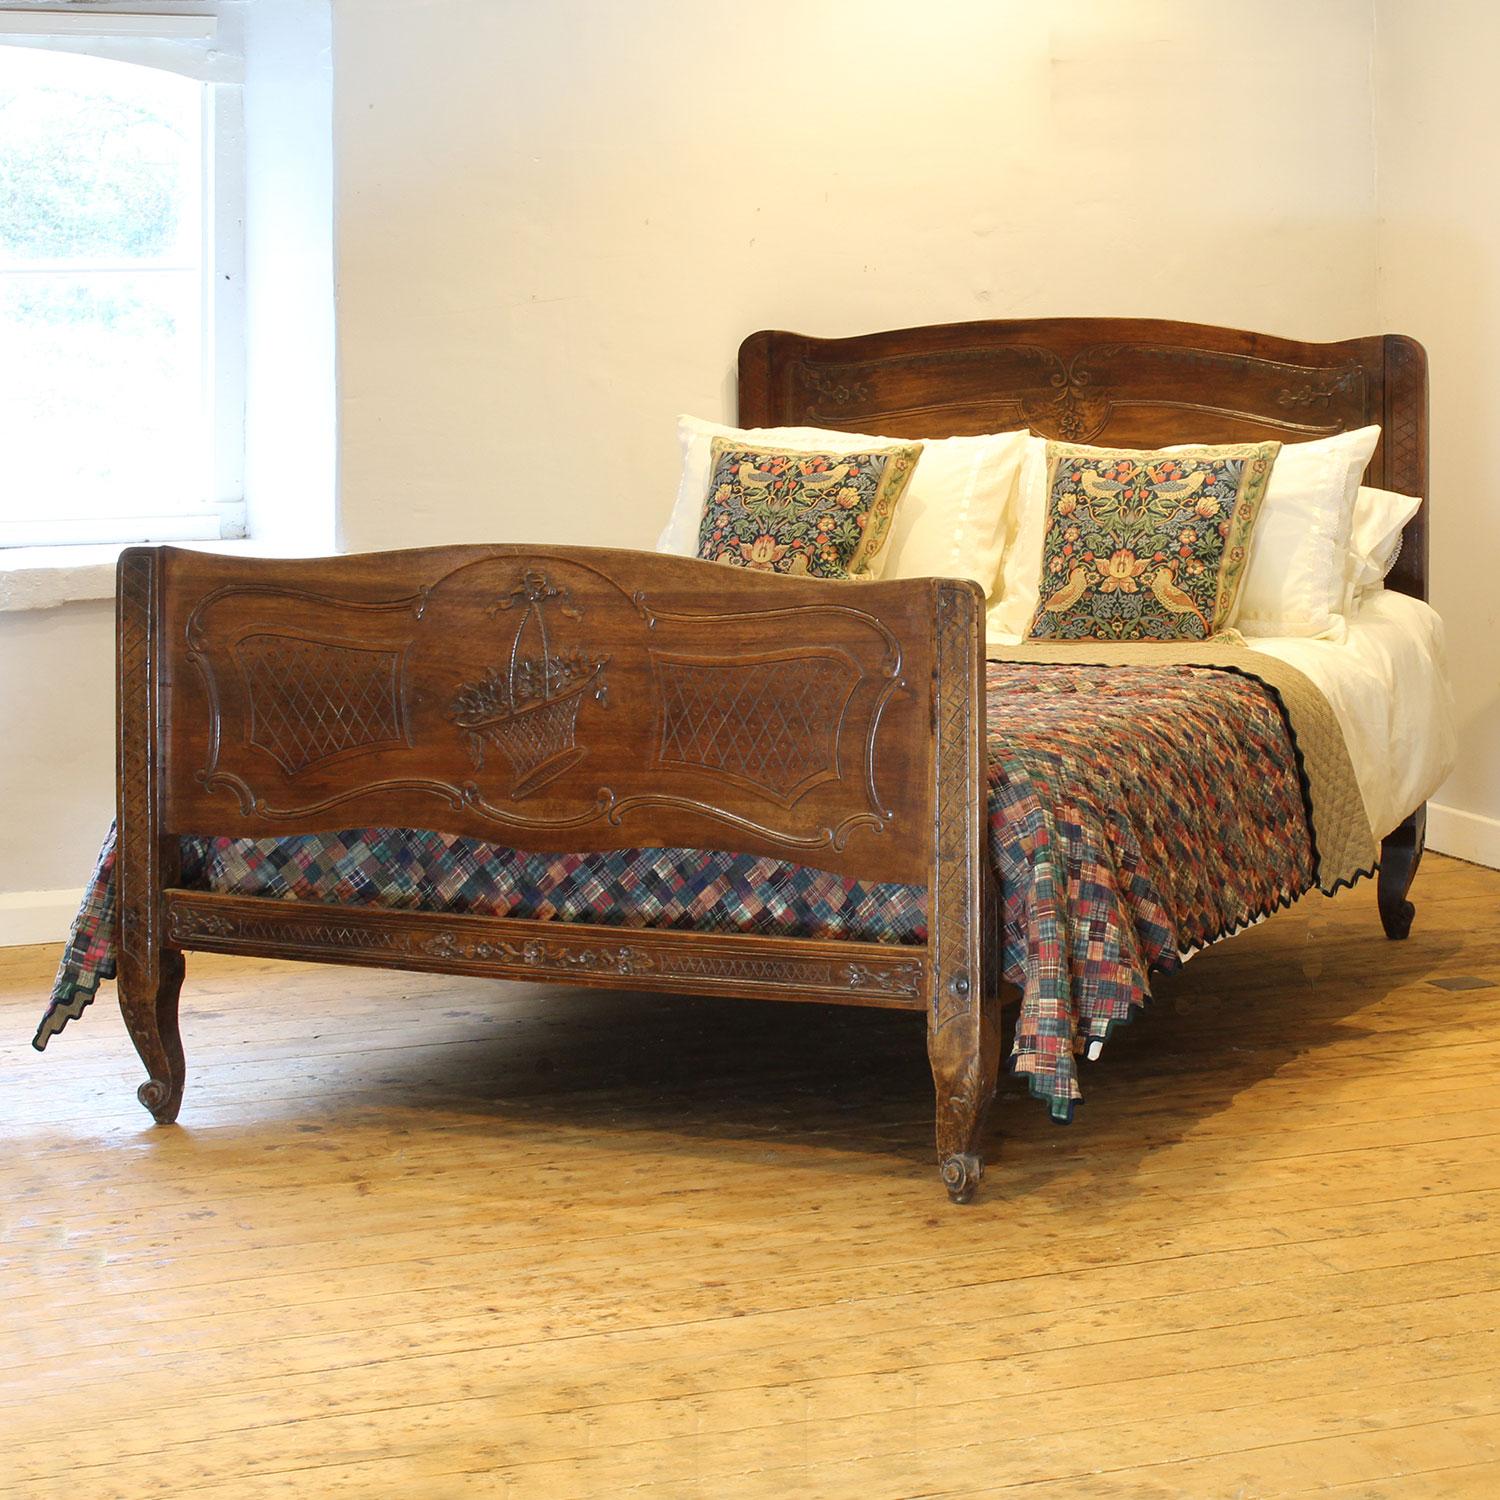 A rural French antique bed in walnut with delicate carving and shaped legs.

This bed accepts a British king size or American queen size, 5ft wide (60 inches or 150cm) base and mattress set, with an overlap (as shown)

The price includes a deep